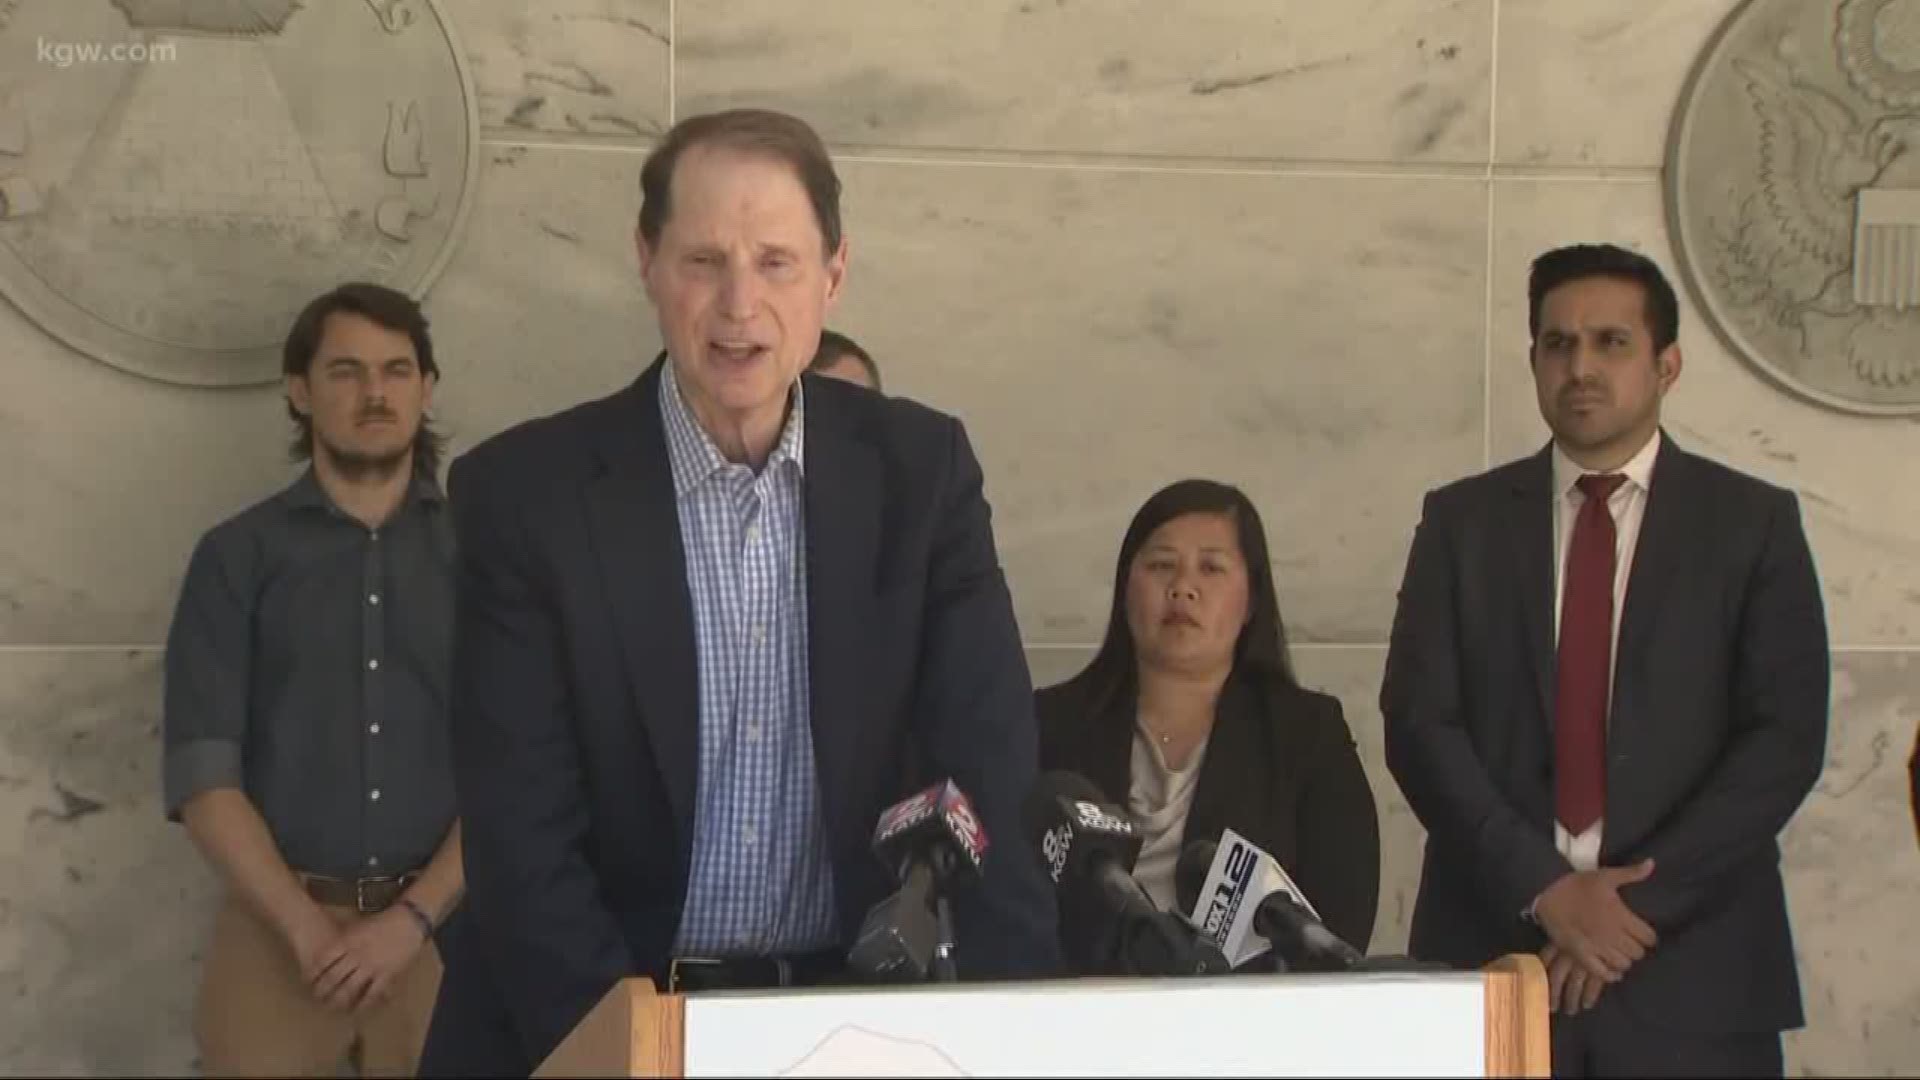 After his visit to Sheridan Federal Prison, where 123 detainees from 16 countries are being held, Oregon Senator Ron Wyden is calling for action.